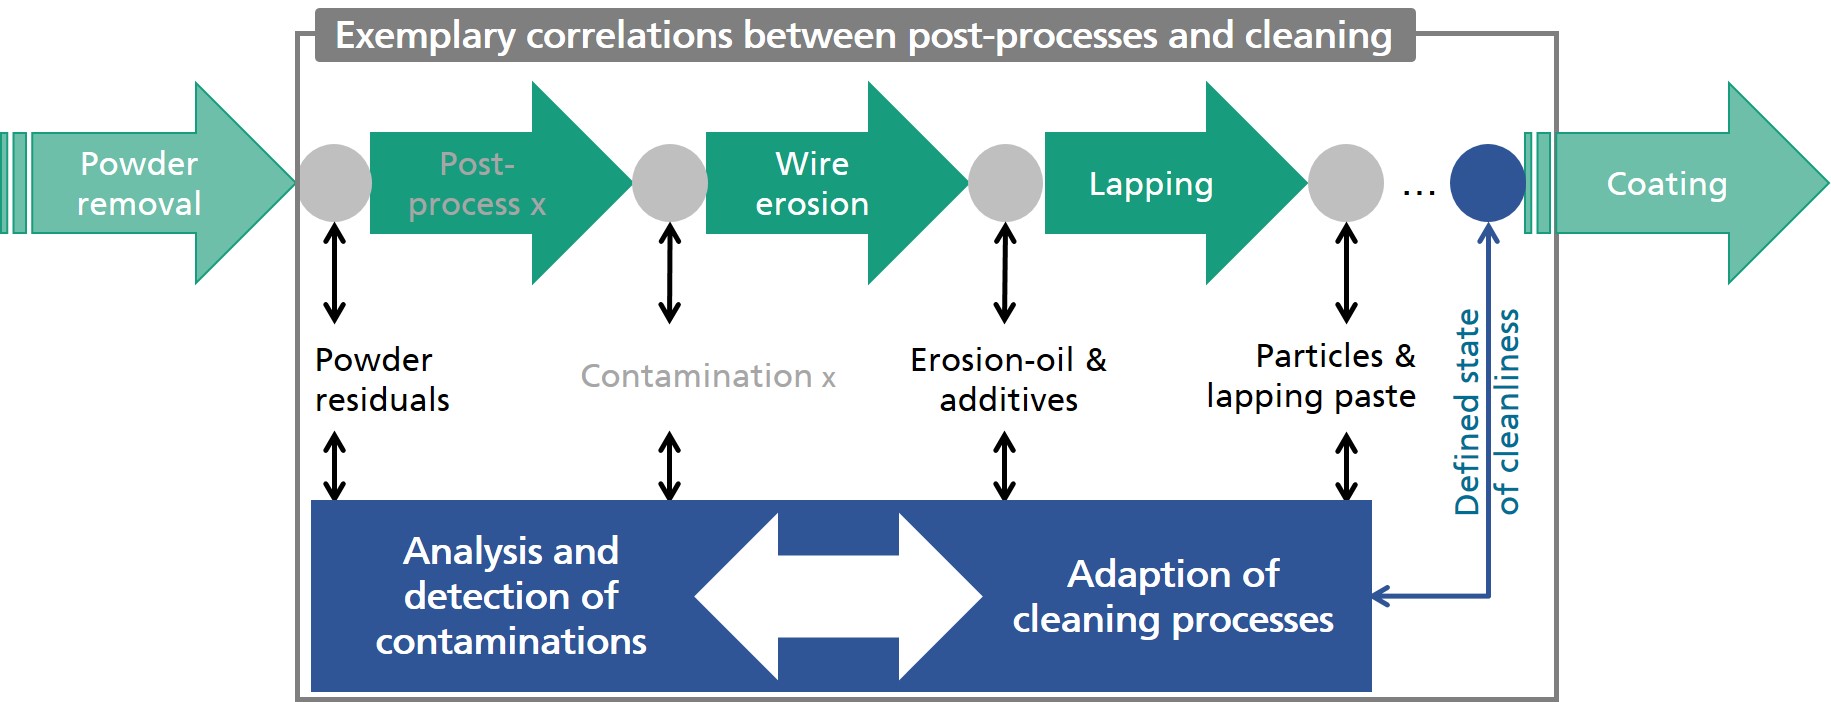 Exemplary cleaning process chain